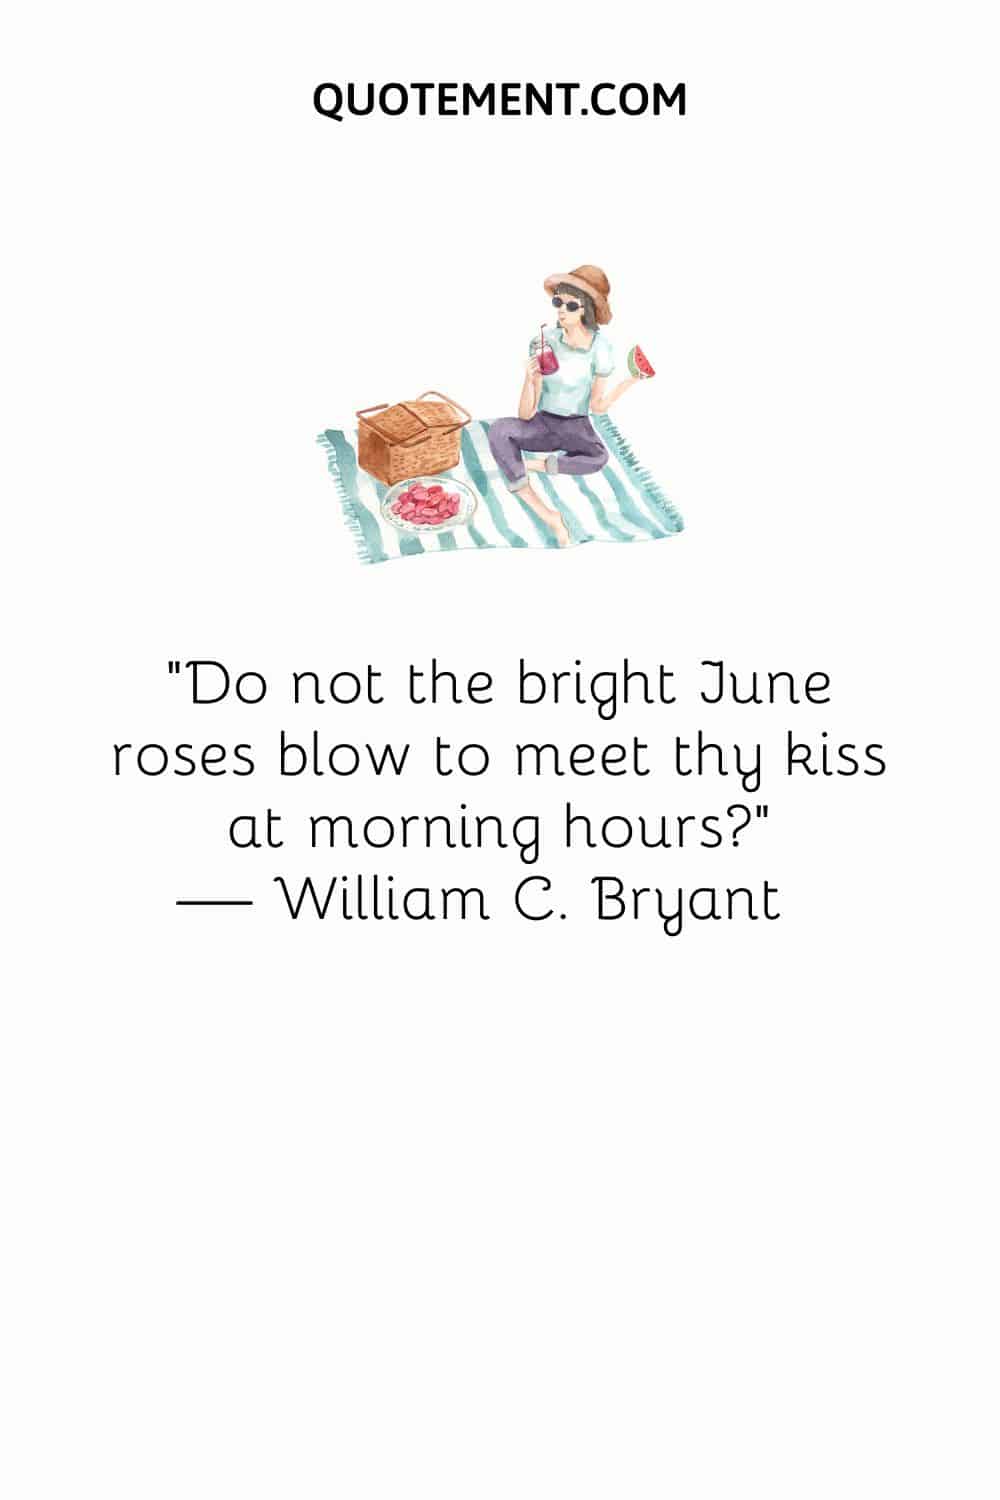 “Do not the bright June roses blow to meet thy kiss at morning hours” — William C. Bryant